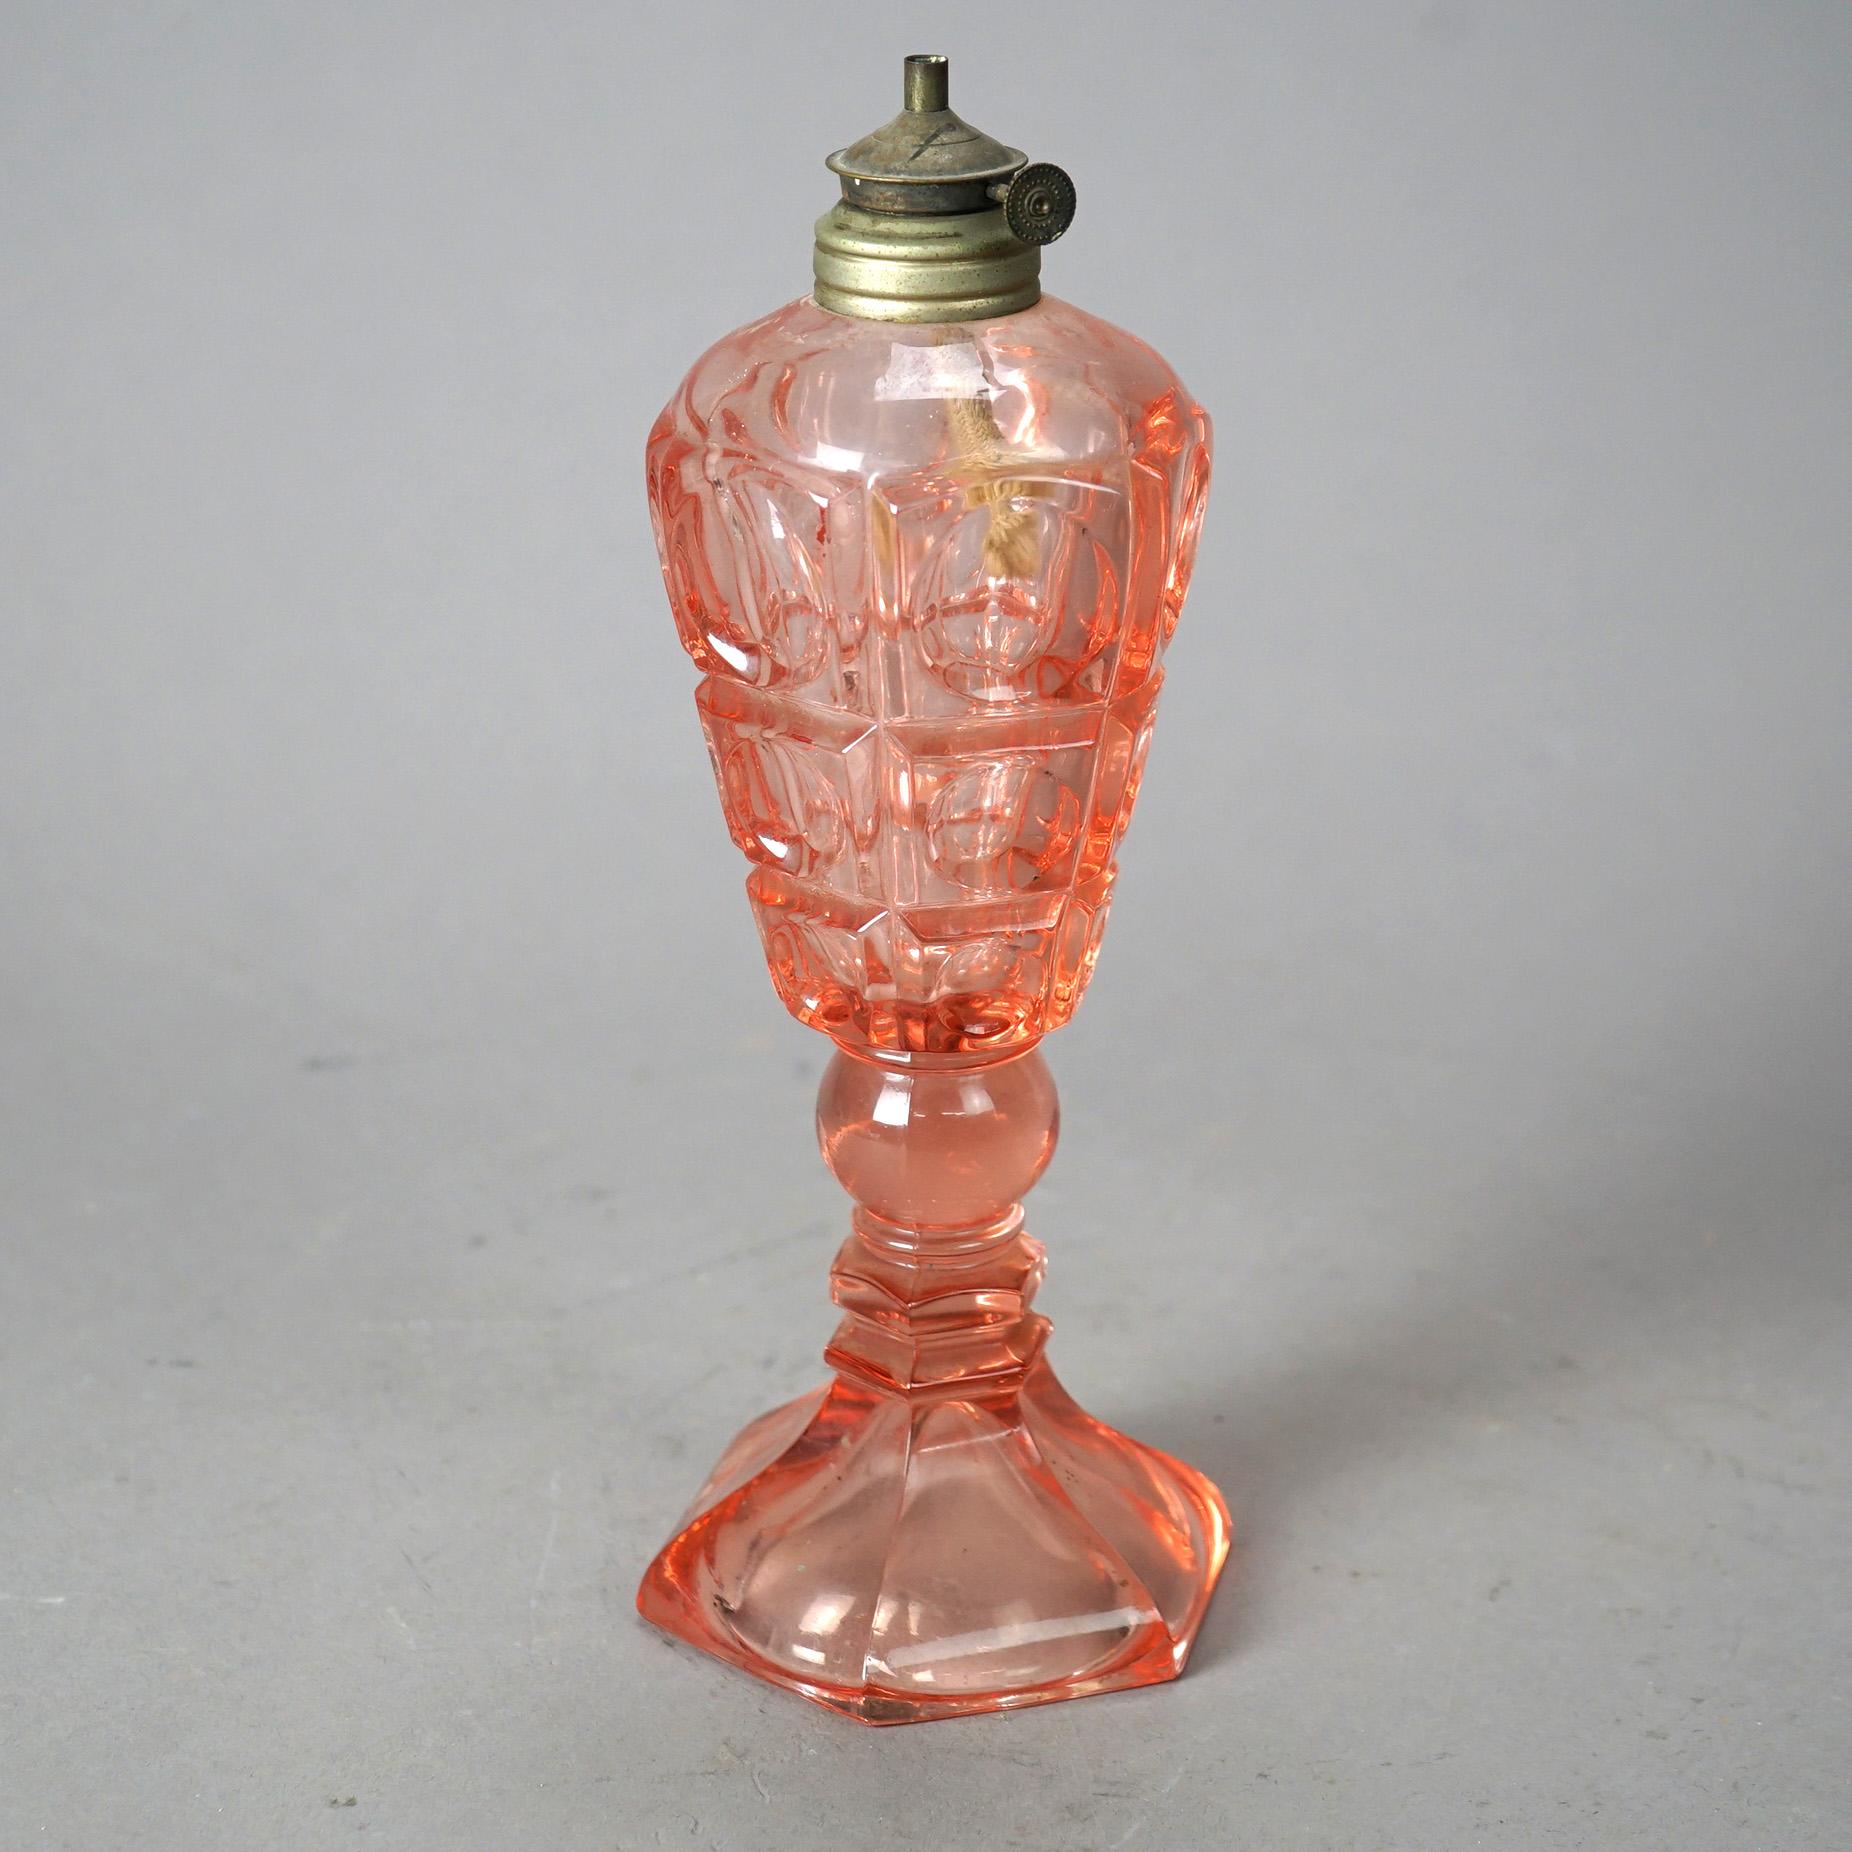 An antique oil lamp offers pink pressed glass construction with paneled coinspot pattern raised on column with hexagonal foot, c1840

Measures - 10